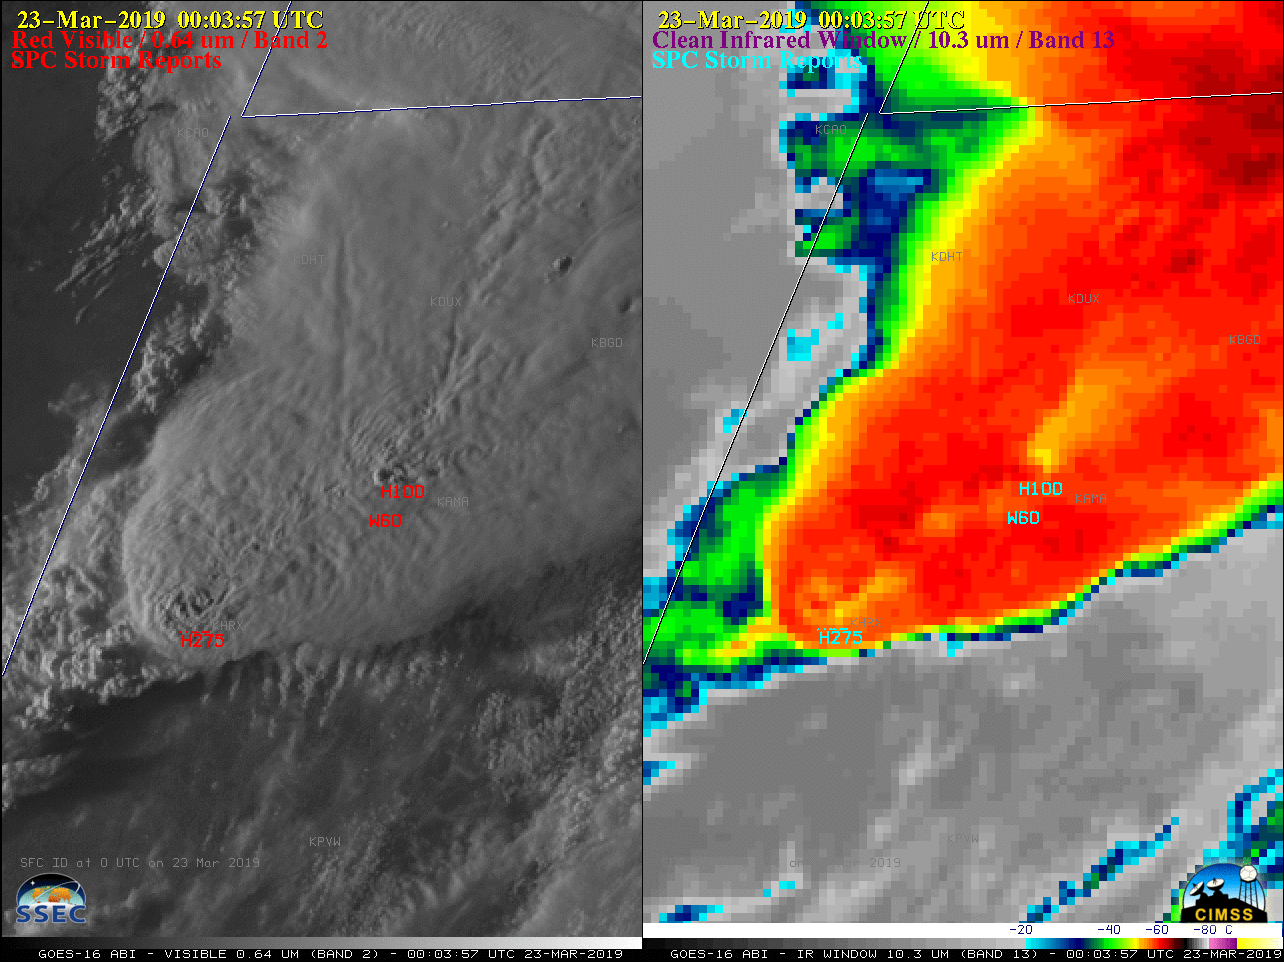 GOES-16 "Clean" Infrared Window (10.3 µm) images, with SPC storm replorts plotted in cyan [click to play animation | MP4]